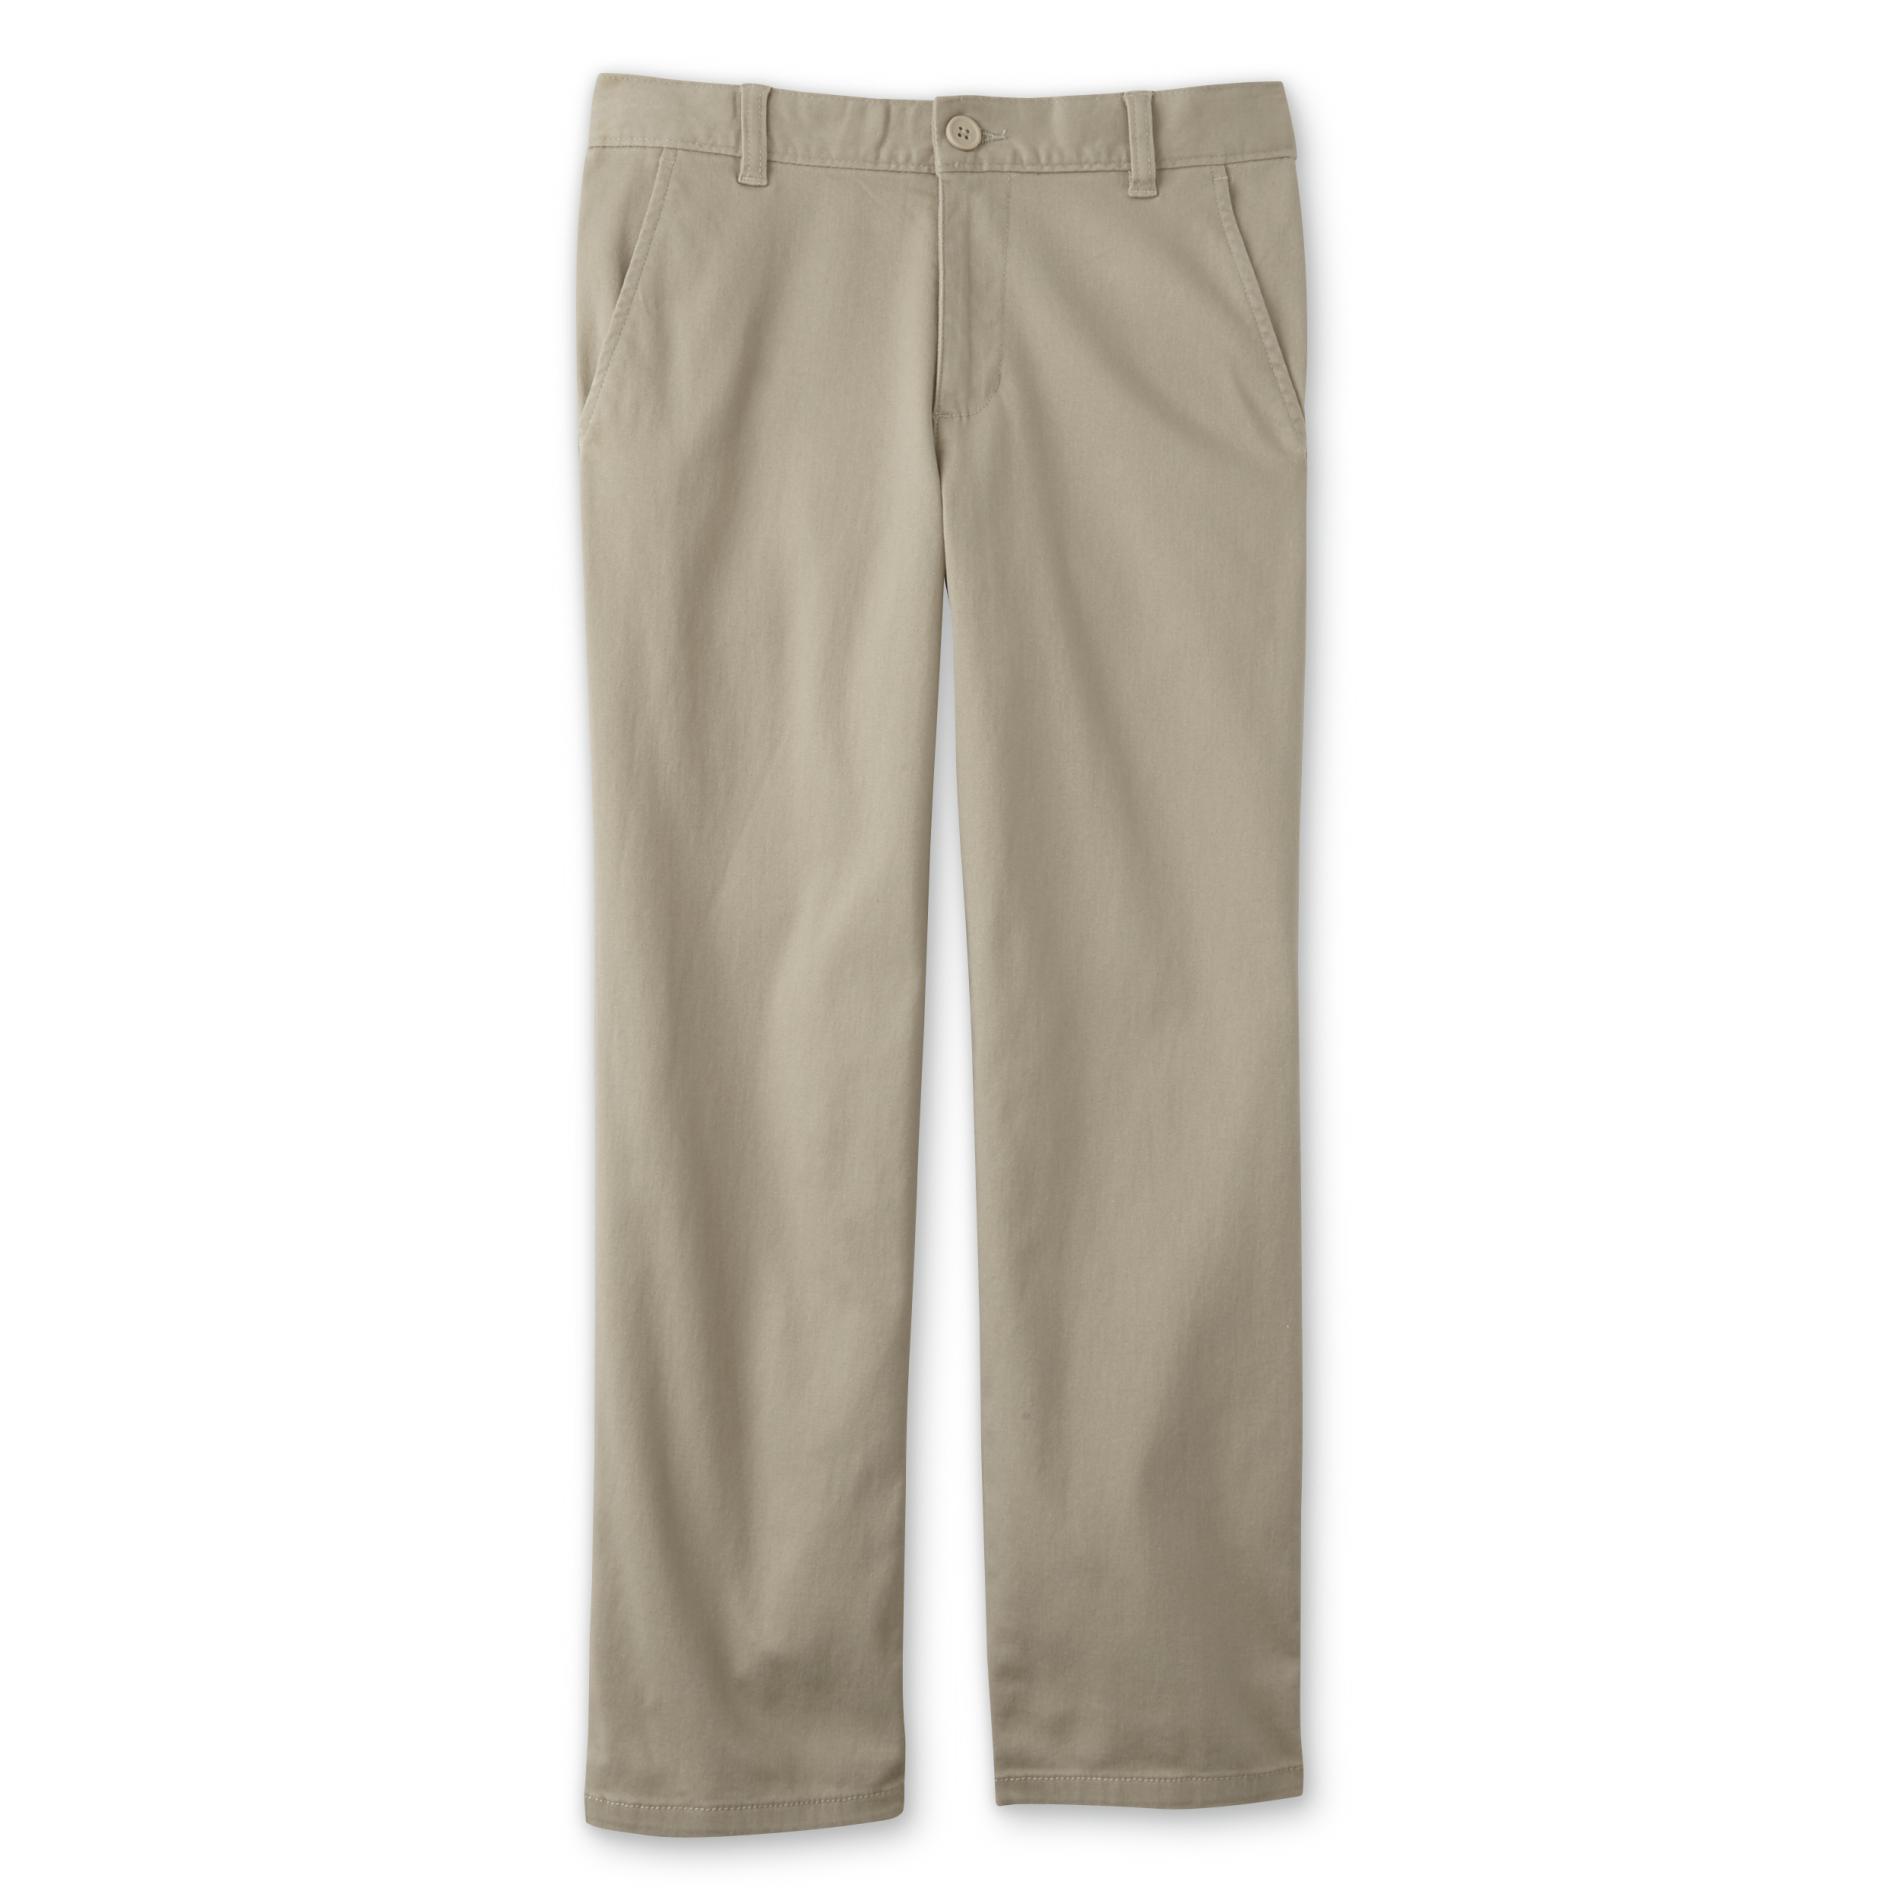 Simply Styled Boys' Husky Flat Front Twill Pants